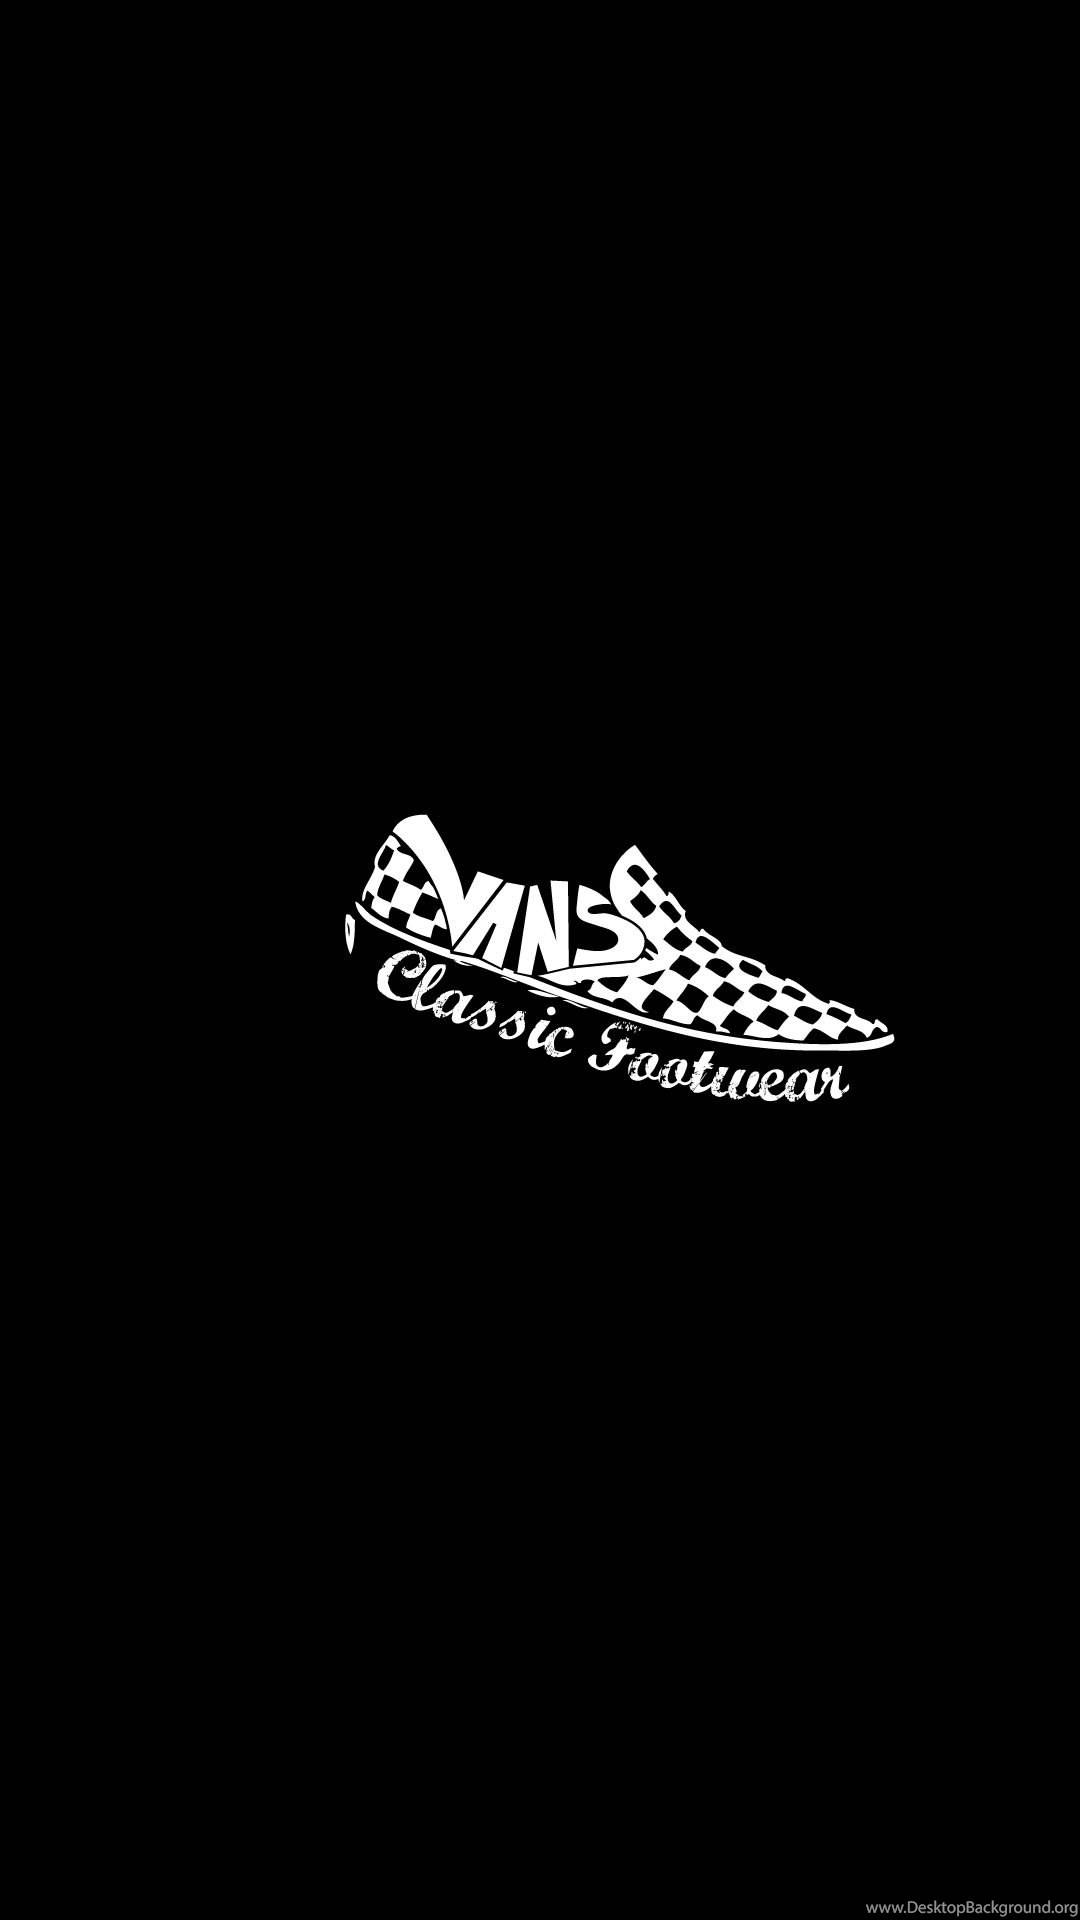 Vans 1080X1920 Wallpaper and Background Image